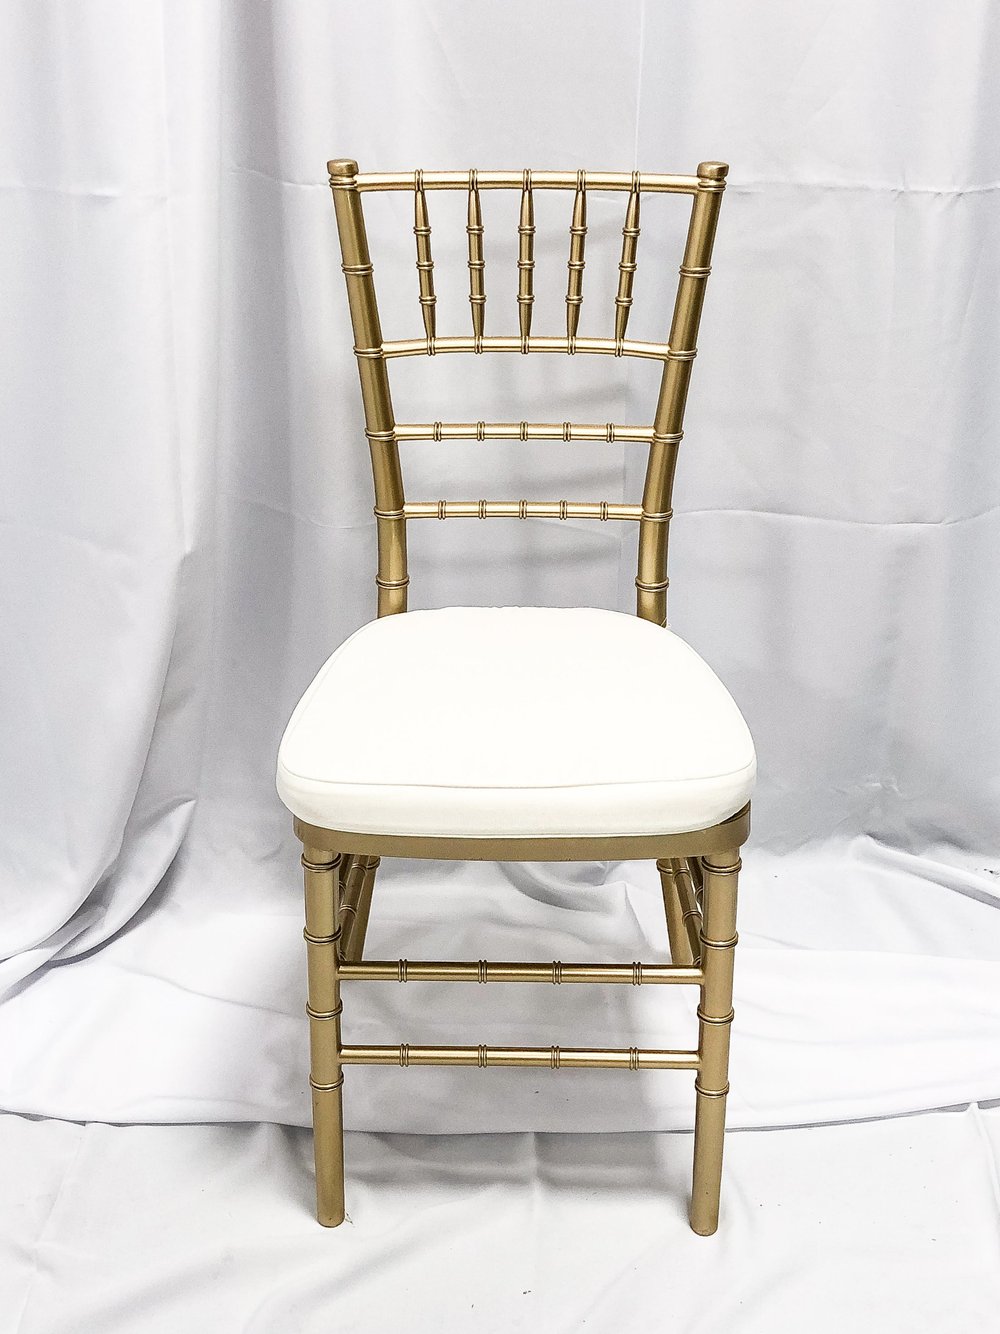 Gold Chiavari Chair Rentals: Elegance for your East Bay Events